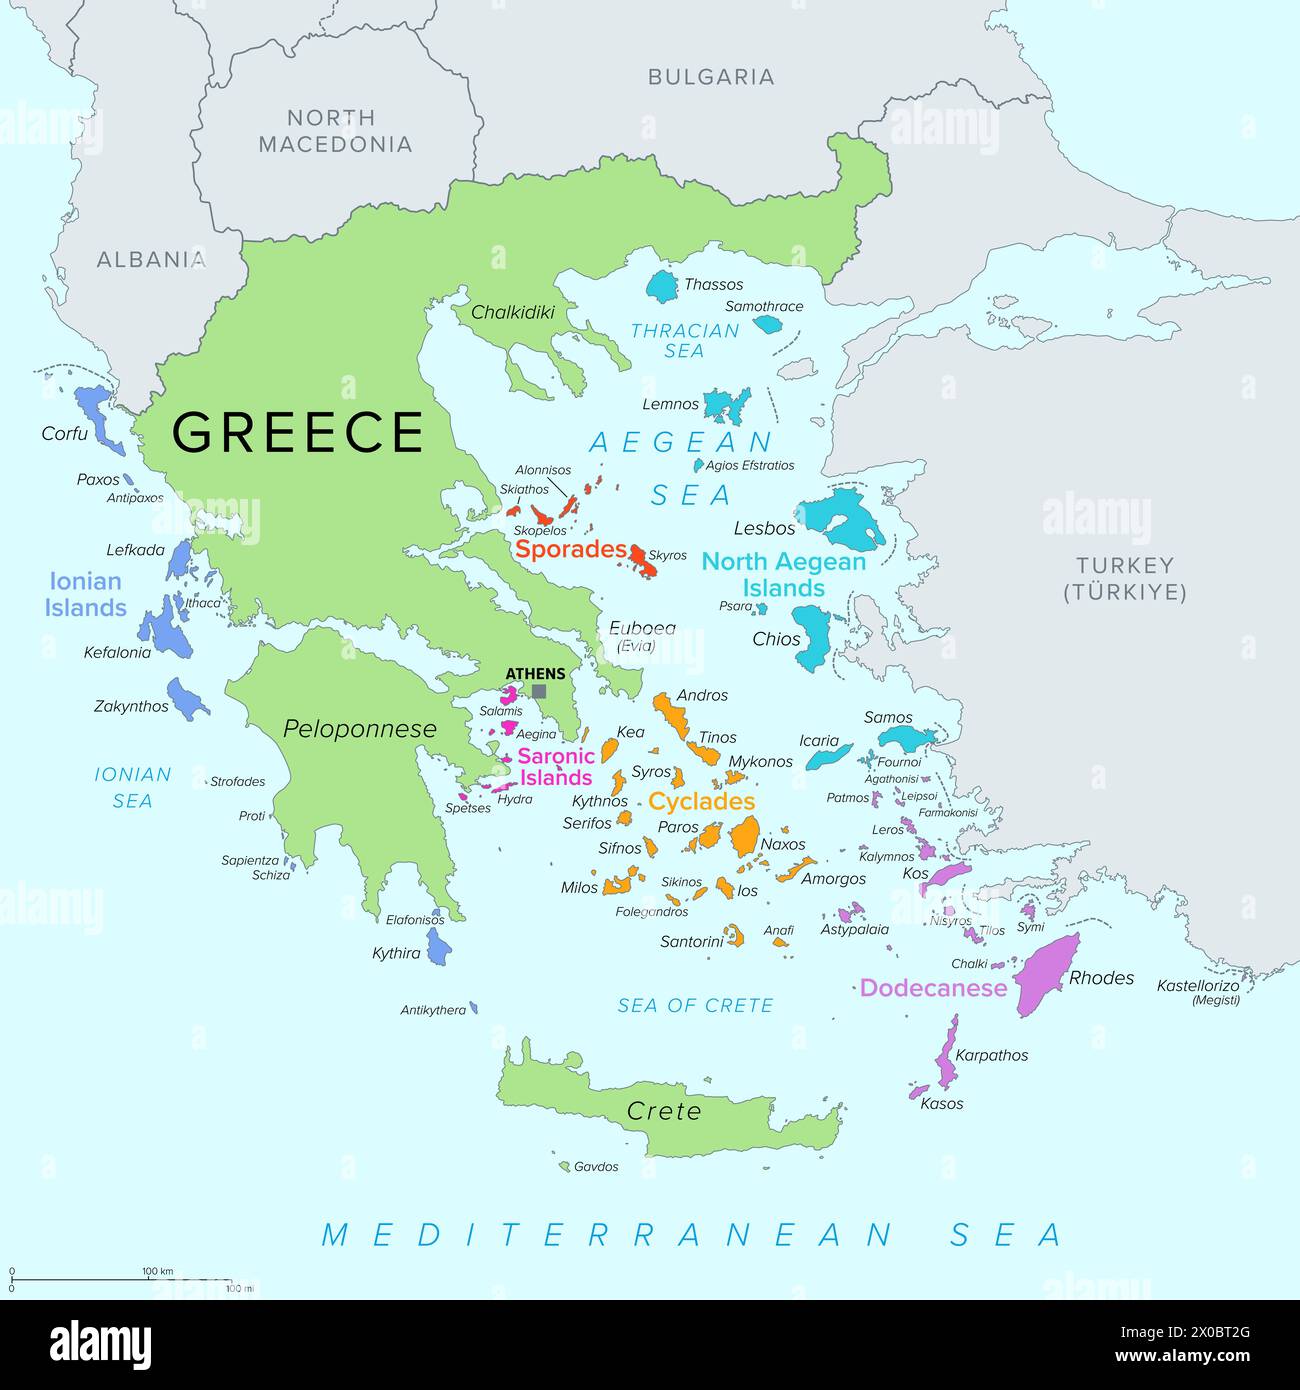 Islands of Greece, political map. Greek islands groups and clusters. The Cyclades, Dodecanese, Sporades, North Aegean, Saronic and Ionian Islands. Stock Photo